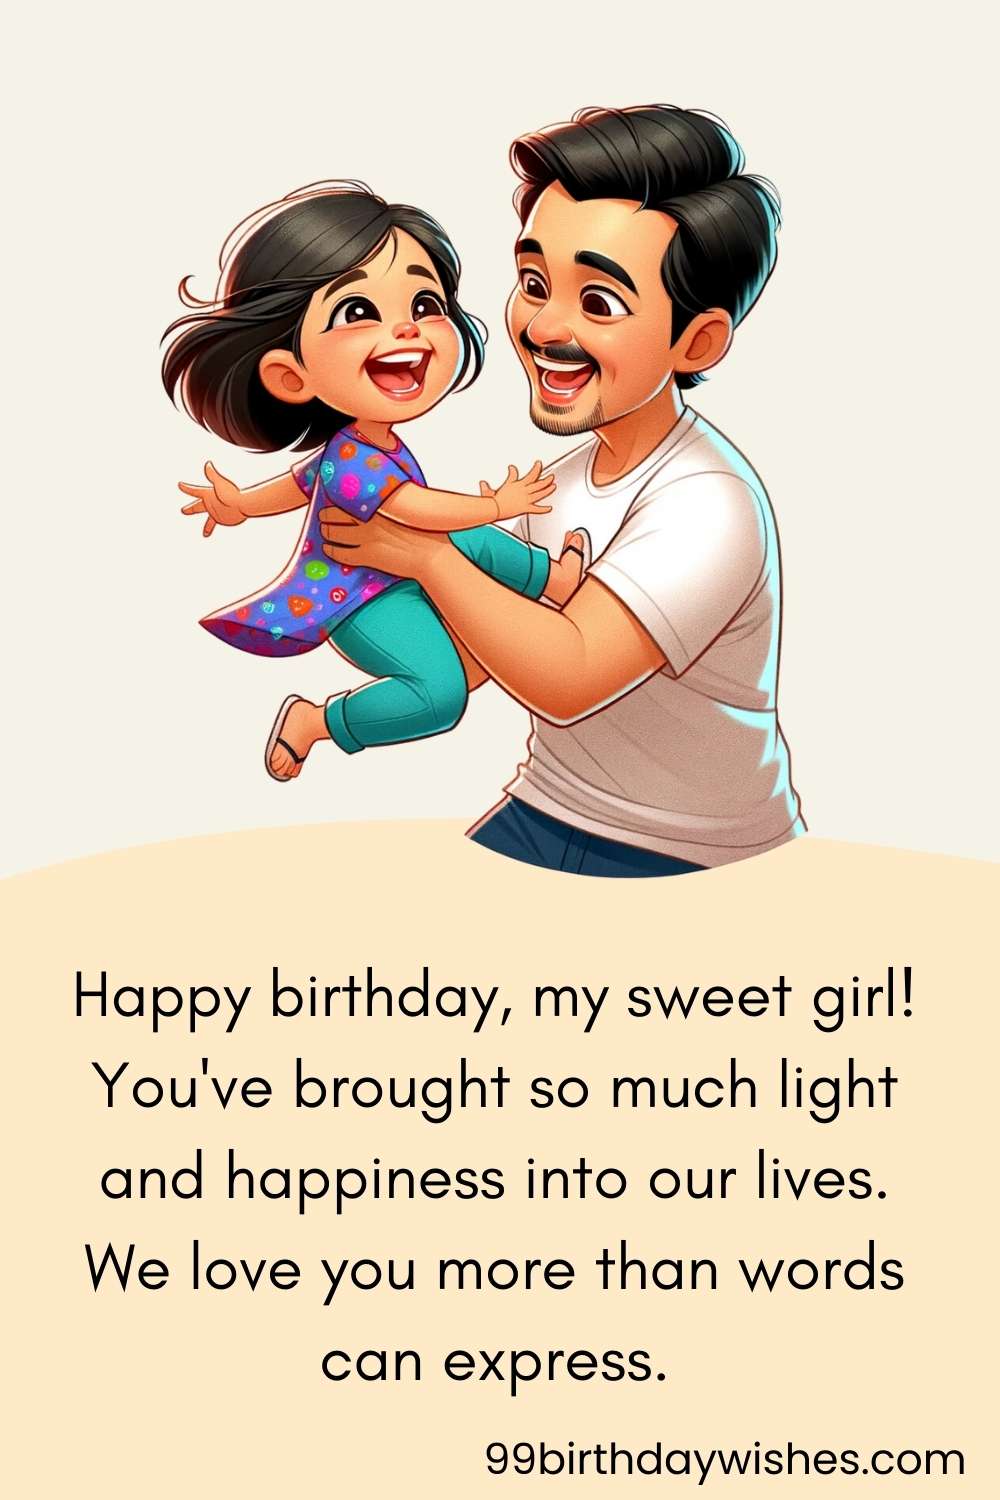 Heartwarming Birthday Wishes For Daughter